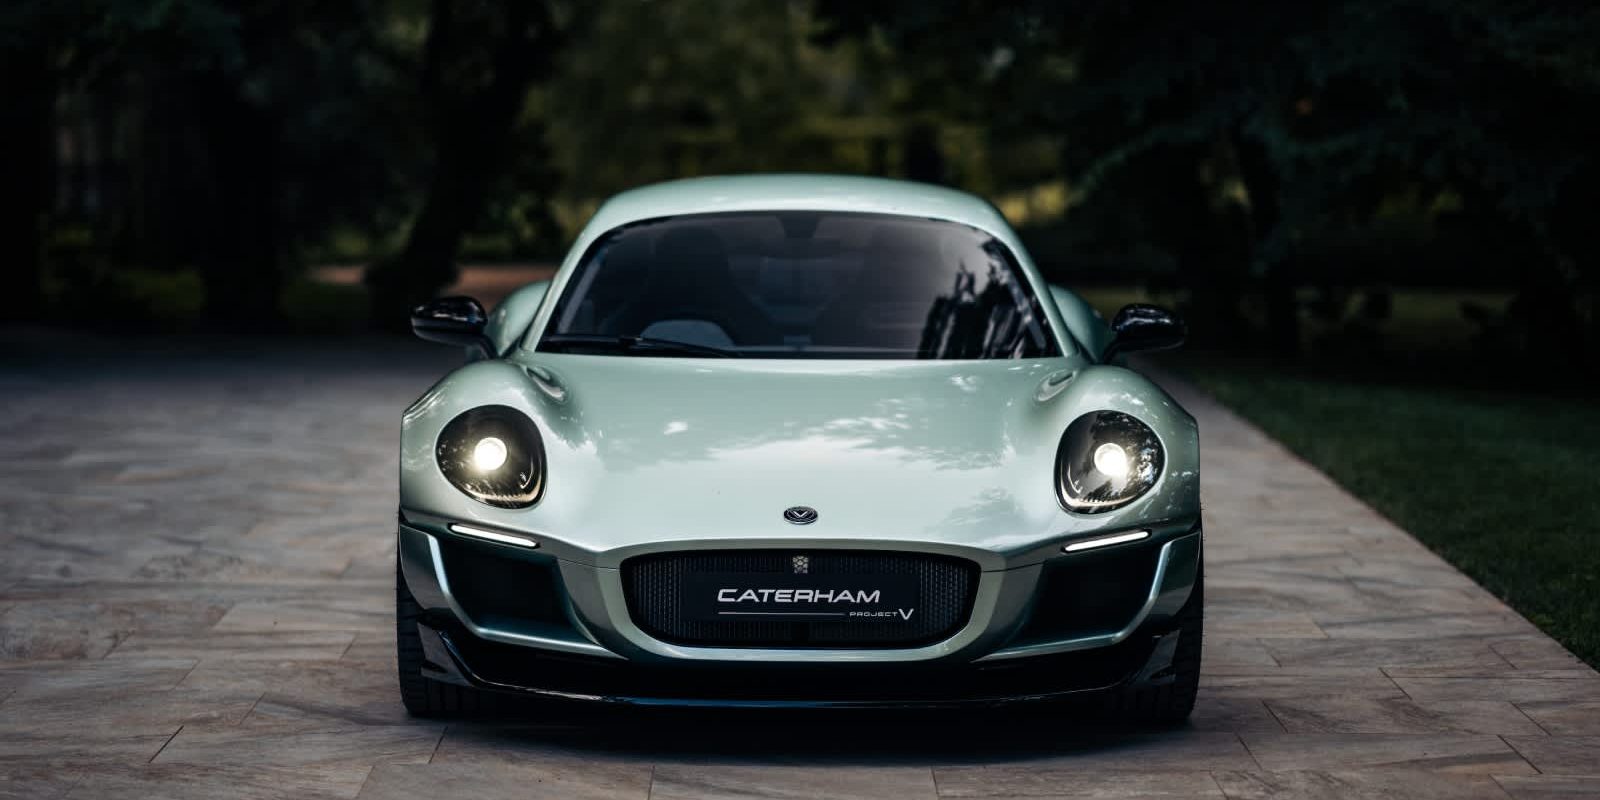 Caterham Project V electric sports-car concept unveiled